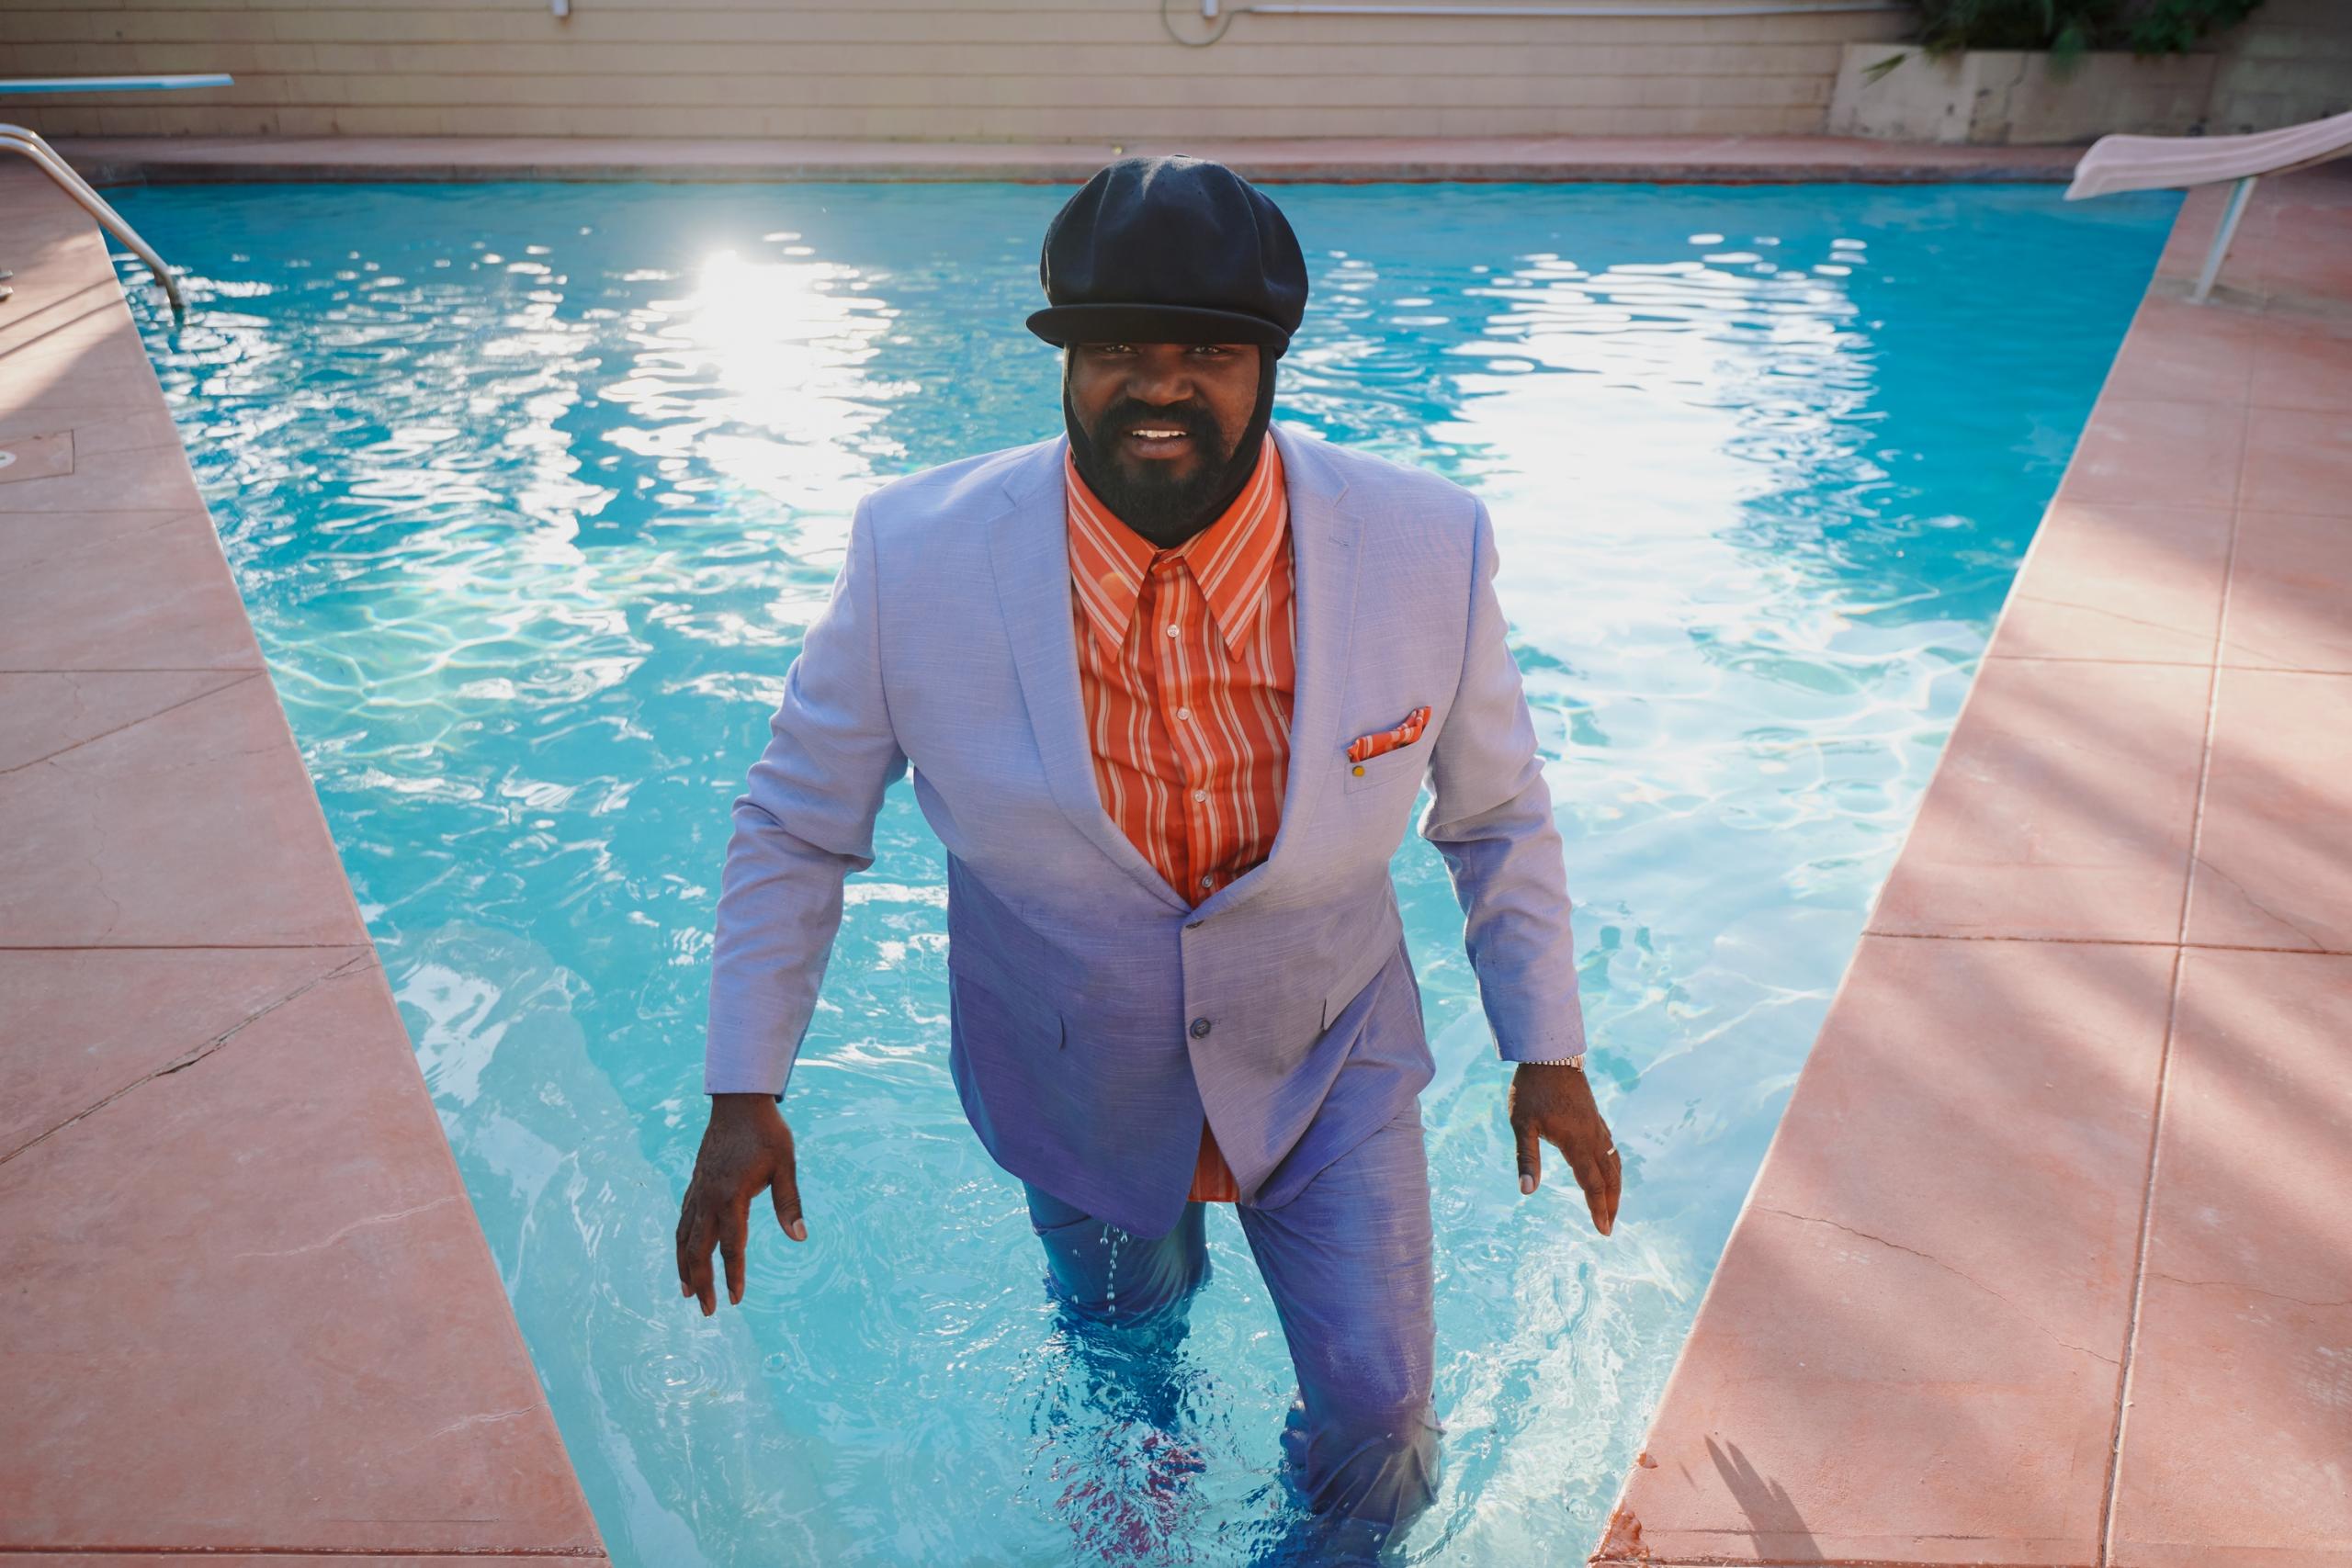 The artist stands in a suit up to his knees in a swimming pool.